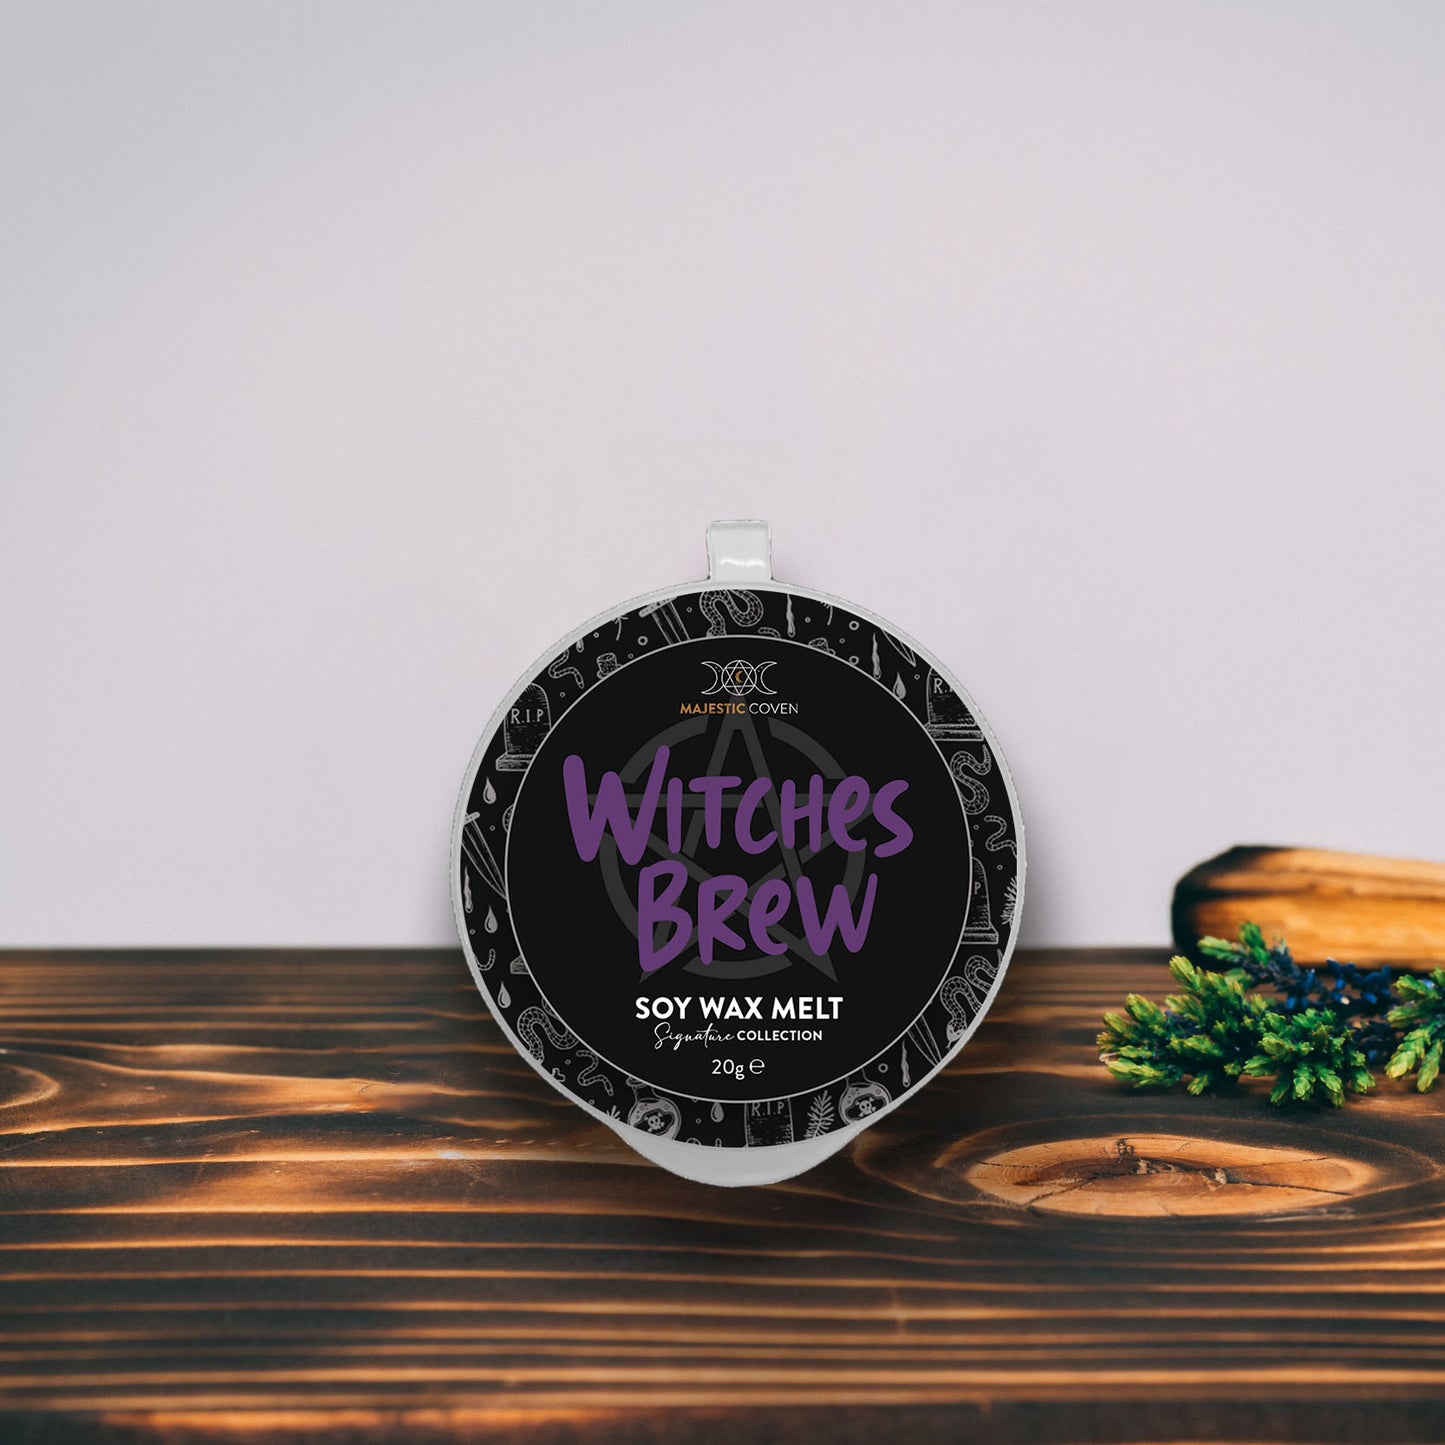 Witches Brew - Soy Wax Melt 20g Sample Pot Majestic Coven